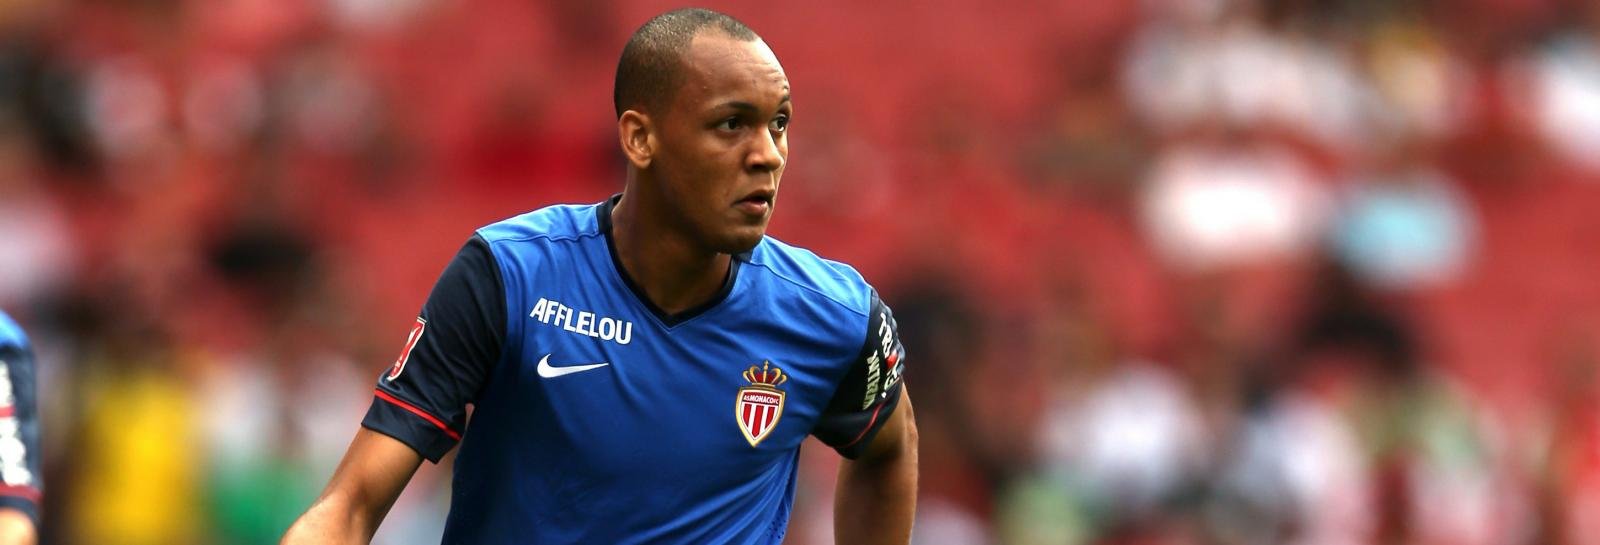 Manchester United eyeing £22m deal for AS Monaco right-back